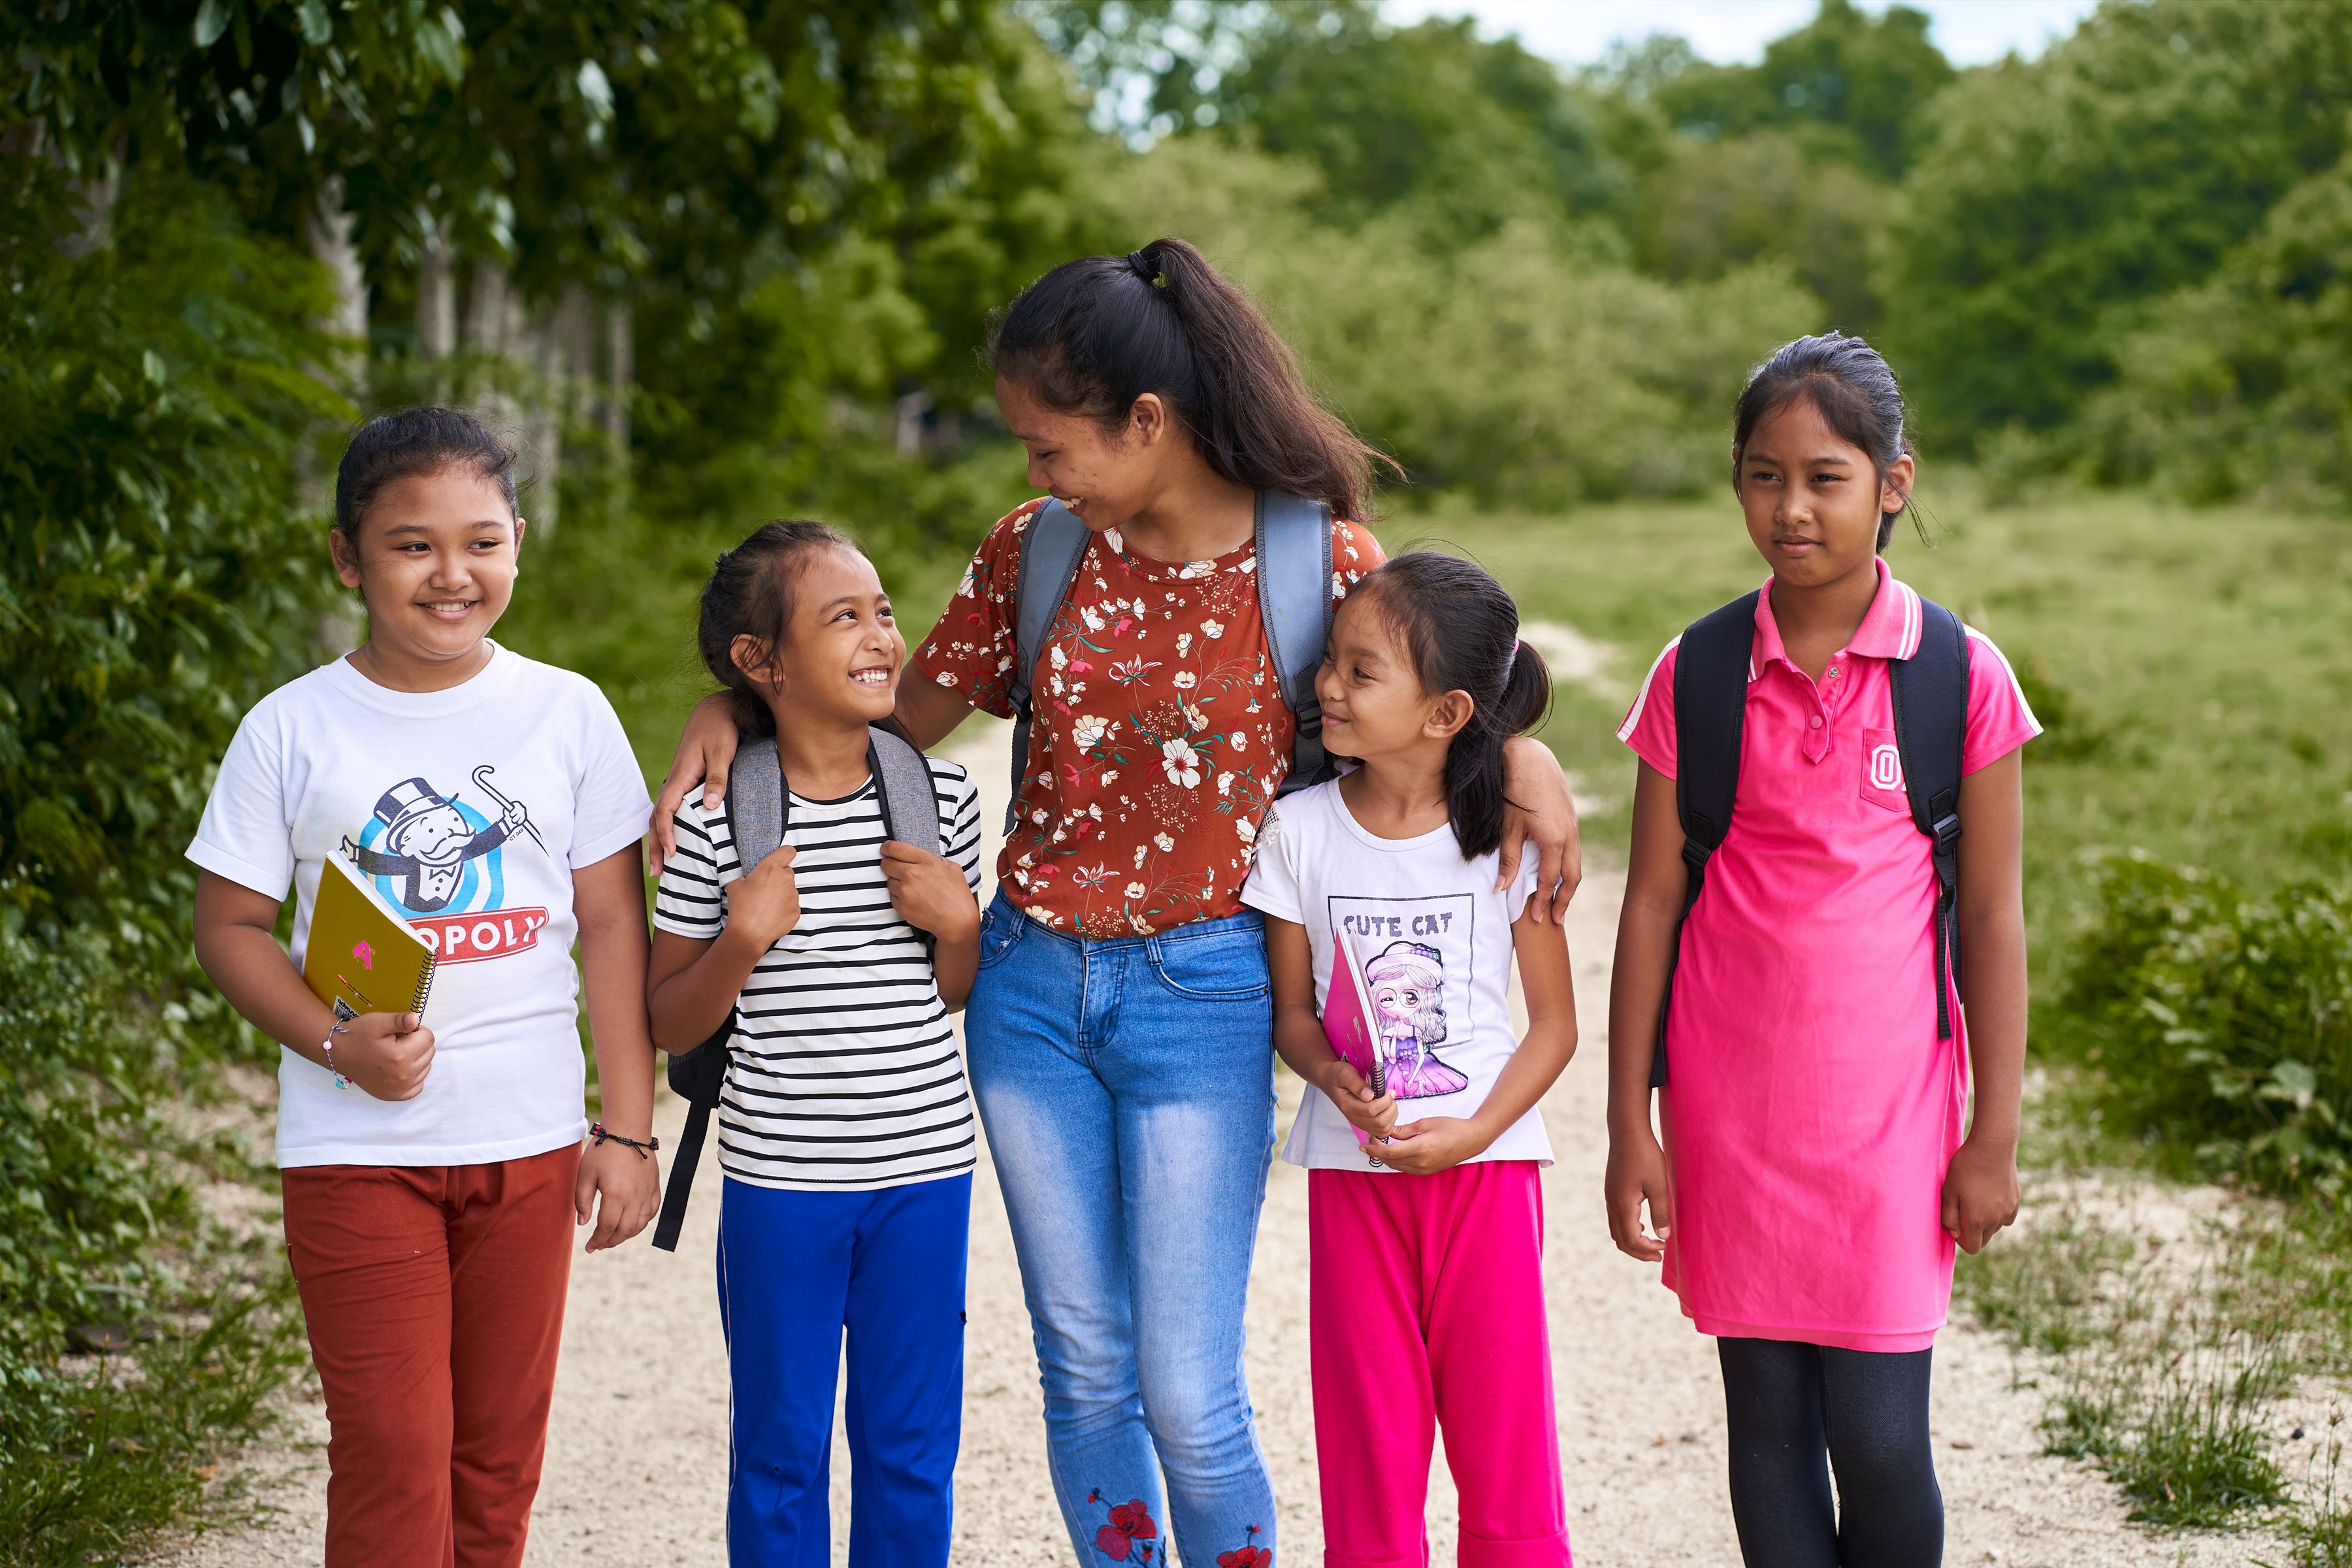 Five girls from the Philippines smiling and walking together in a park